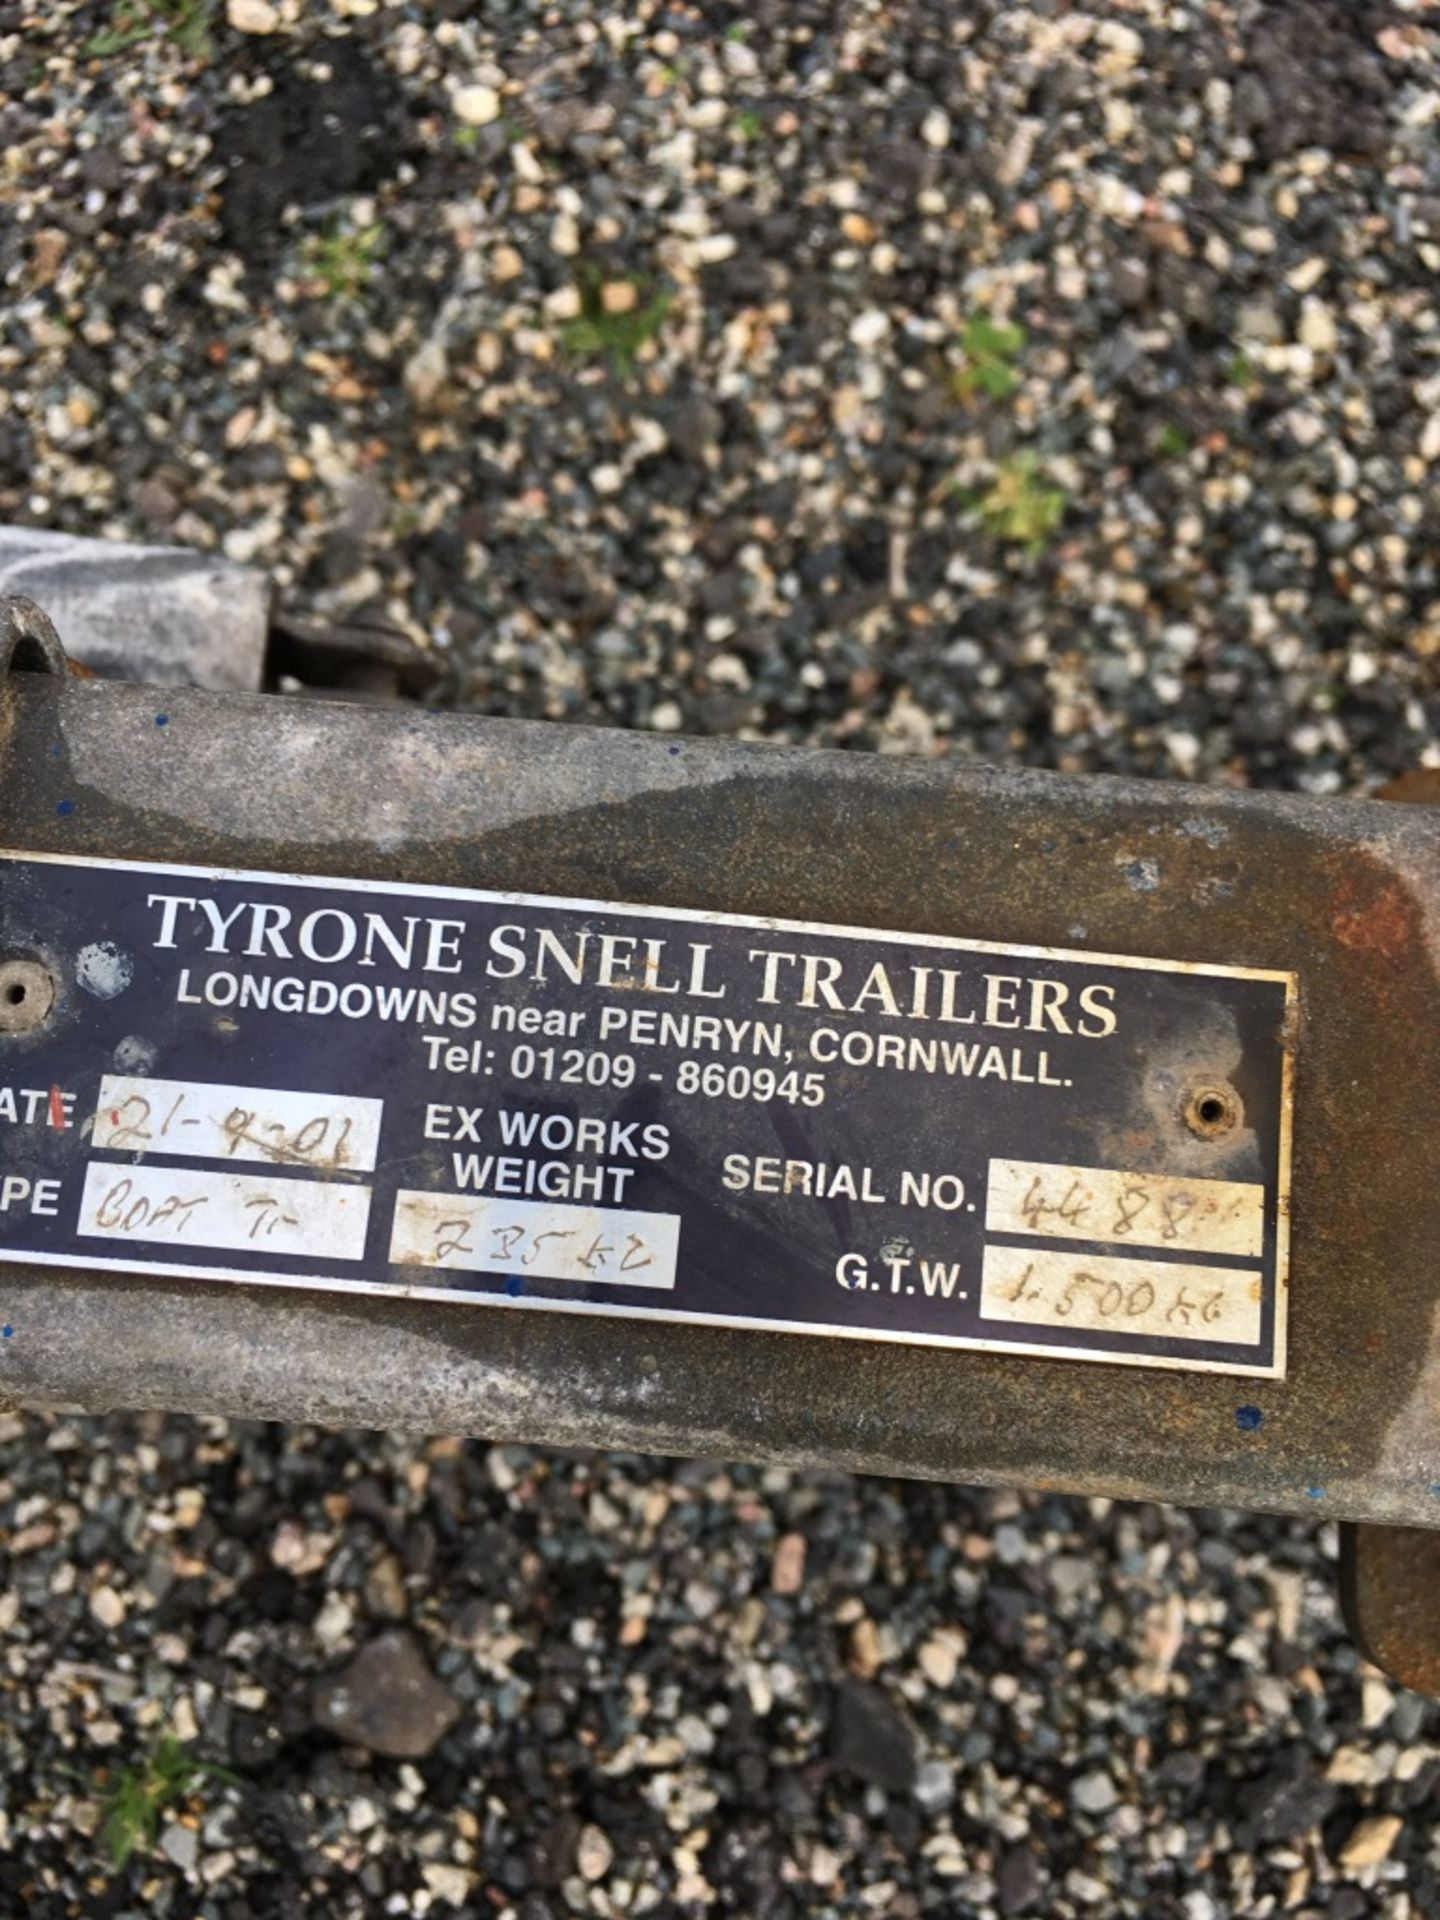 Tyrone Snell Boat Trailer 2001 260281 - Image 2 of 2